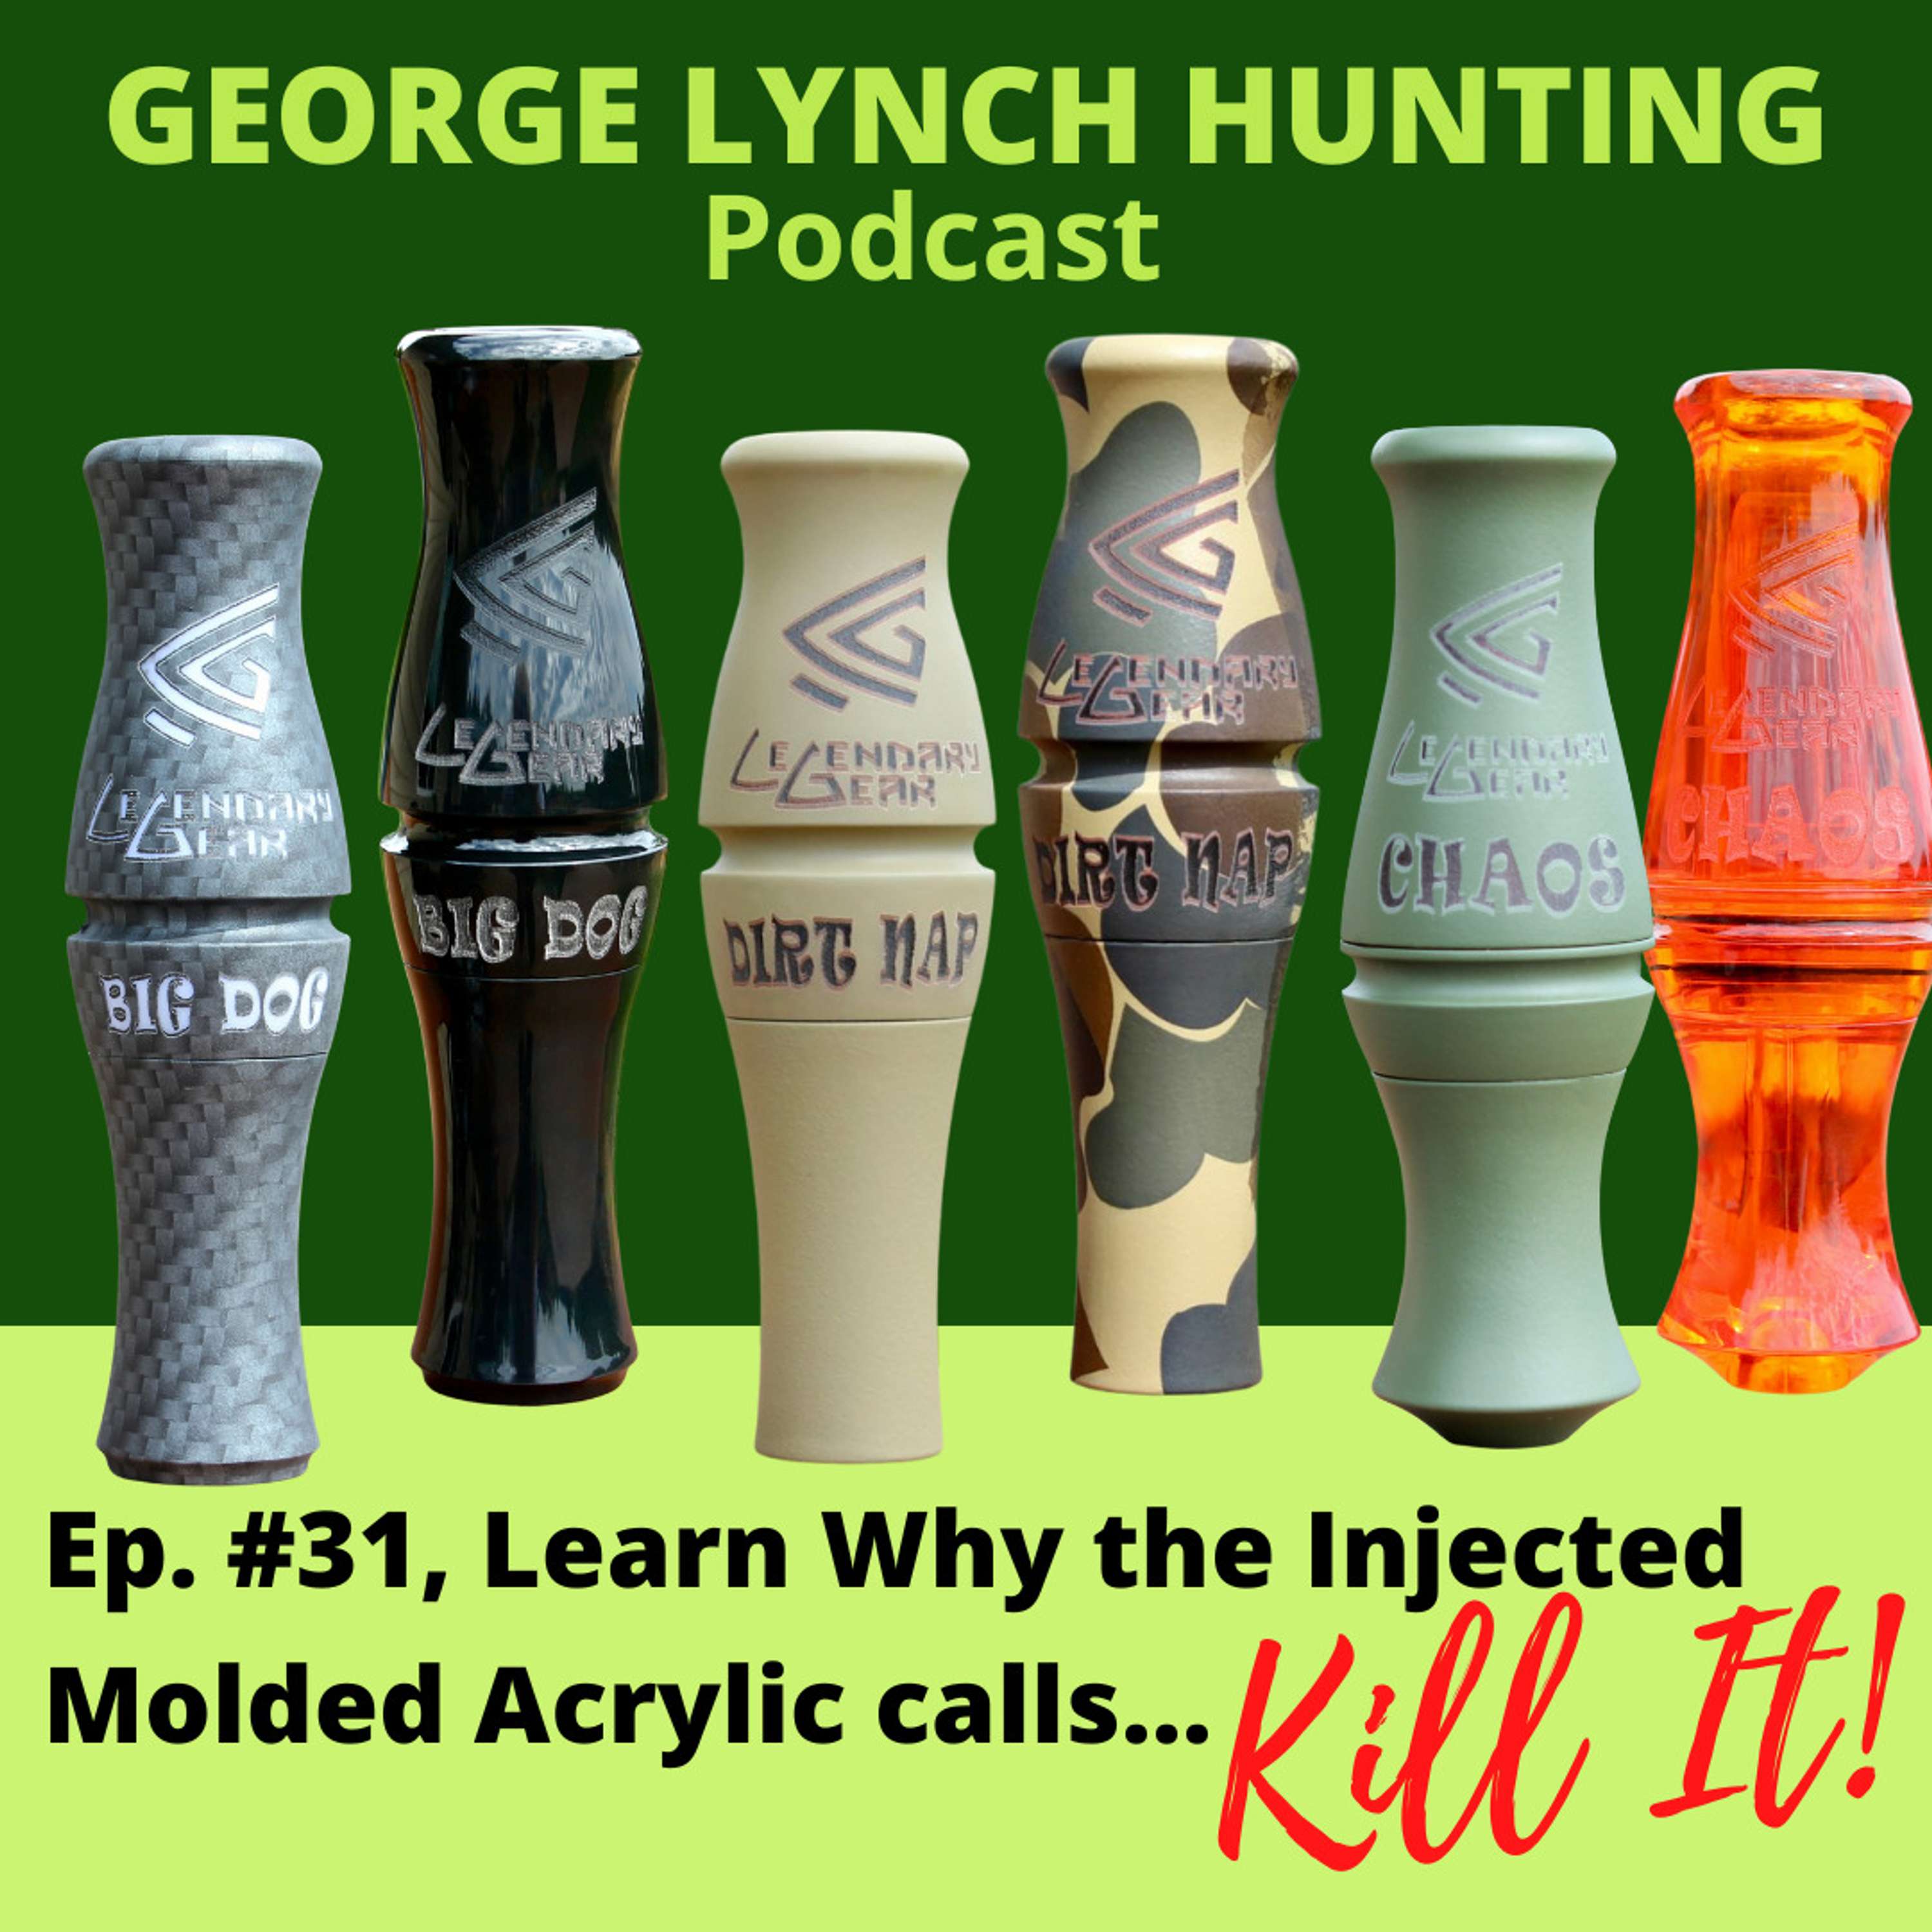 Learn why the Injected Molded Acrylic calls ... KILL IT!  by GEORGE LYNCH